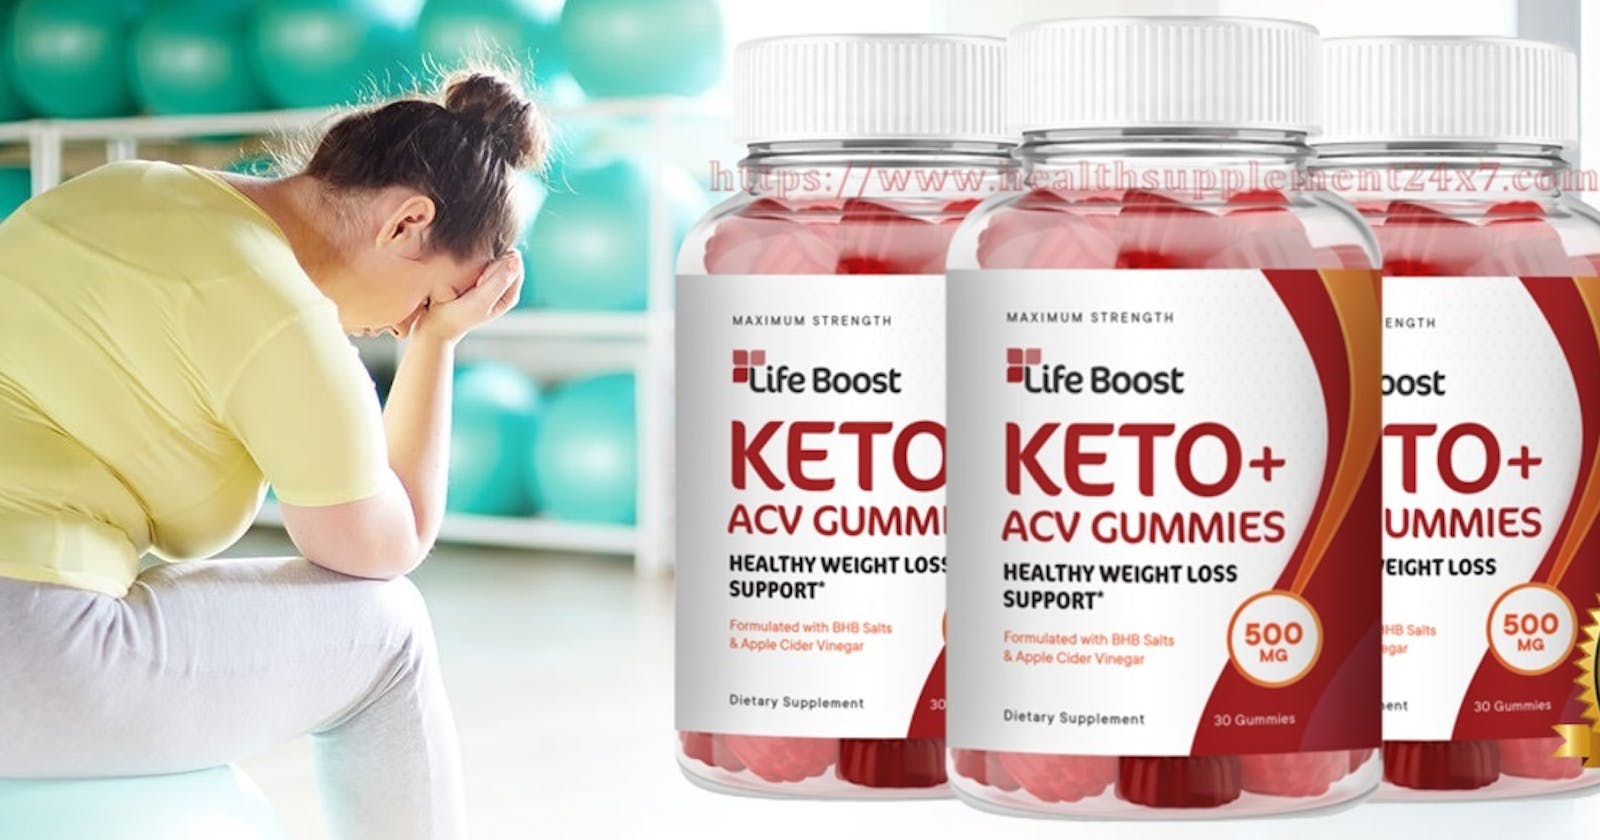 Life Boost Keto + ACV Gummies (Boost Metabolism + Digestion) Should You Buy Or Not?